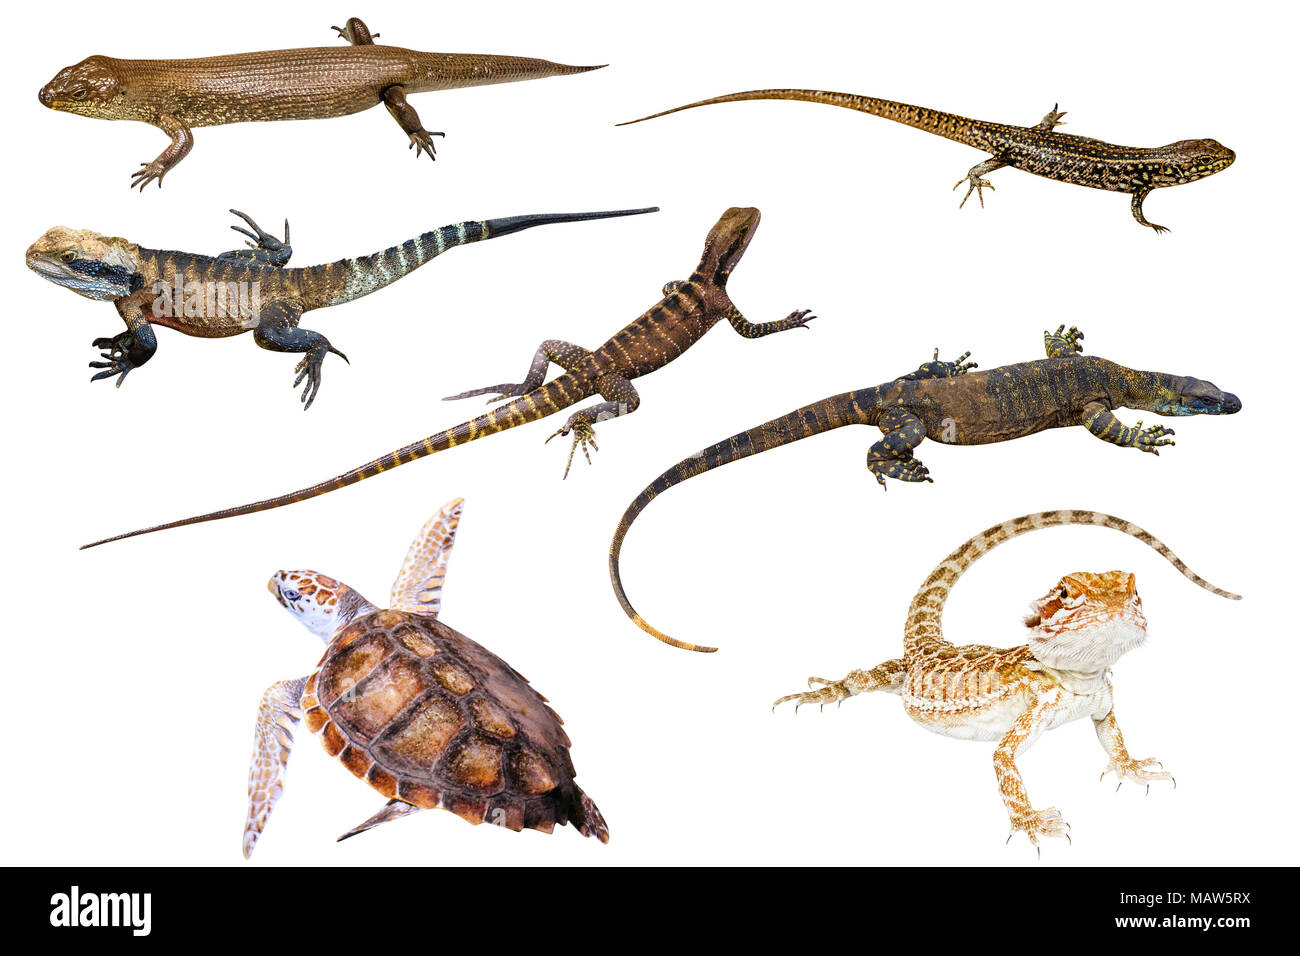 Collage of Australian reptiles, isolated on white background. King's skink, Eastern Water Skink, Water Dragon male and female, Komodo dragon, Green Sea Turtle and Pogona Vitticeps on white background. Stock Photo